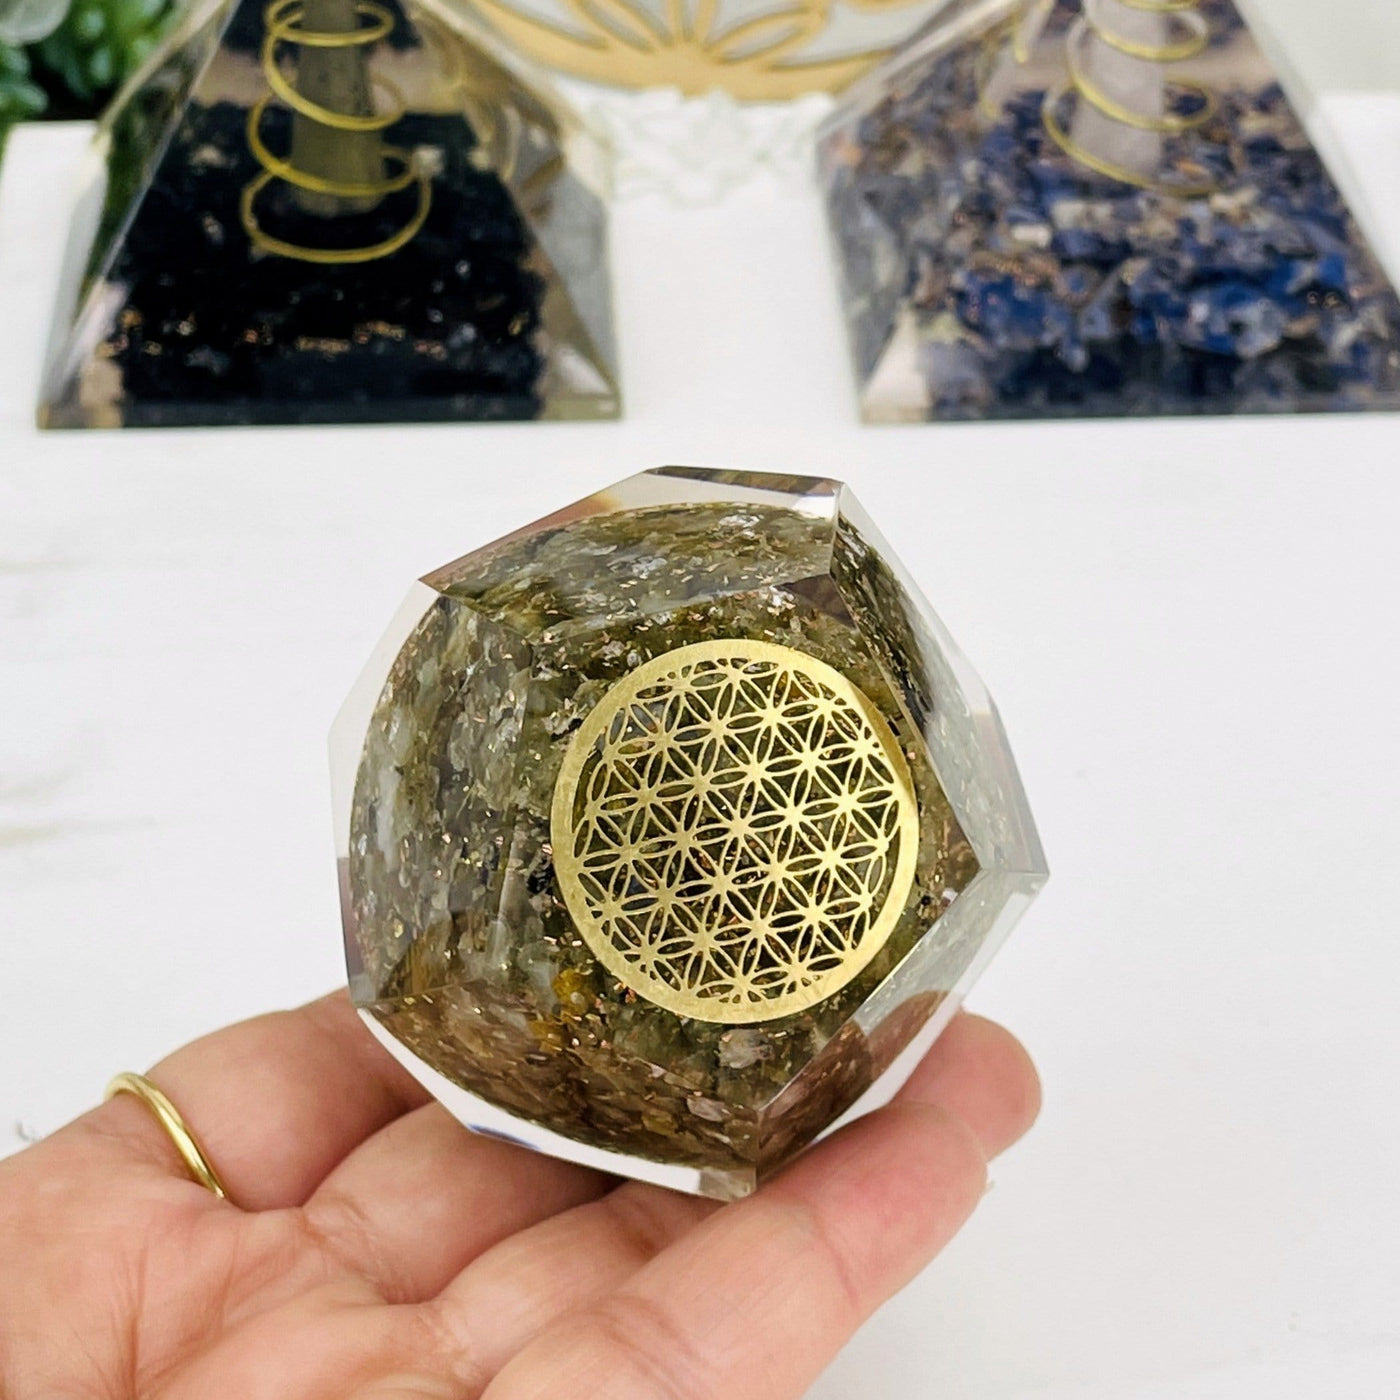 Orgone Energy - Labradorite with Gold Flower of Life Grid - Dodecahedron shaped --front shot view of dodecahedron on hand.